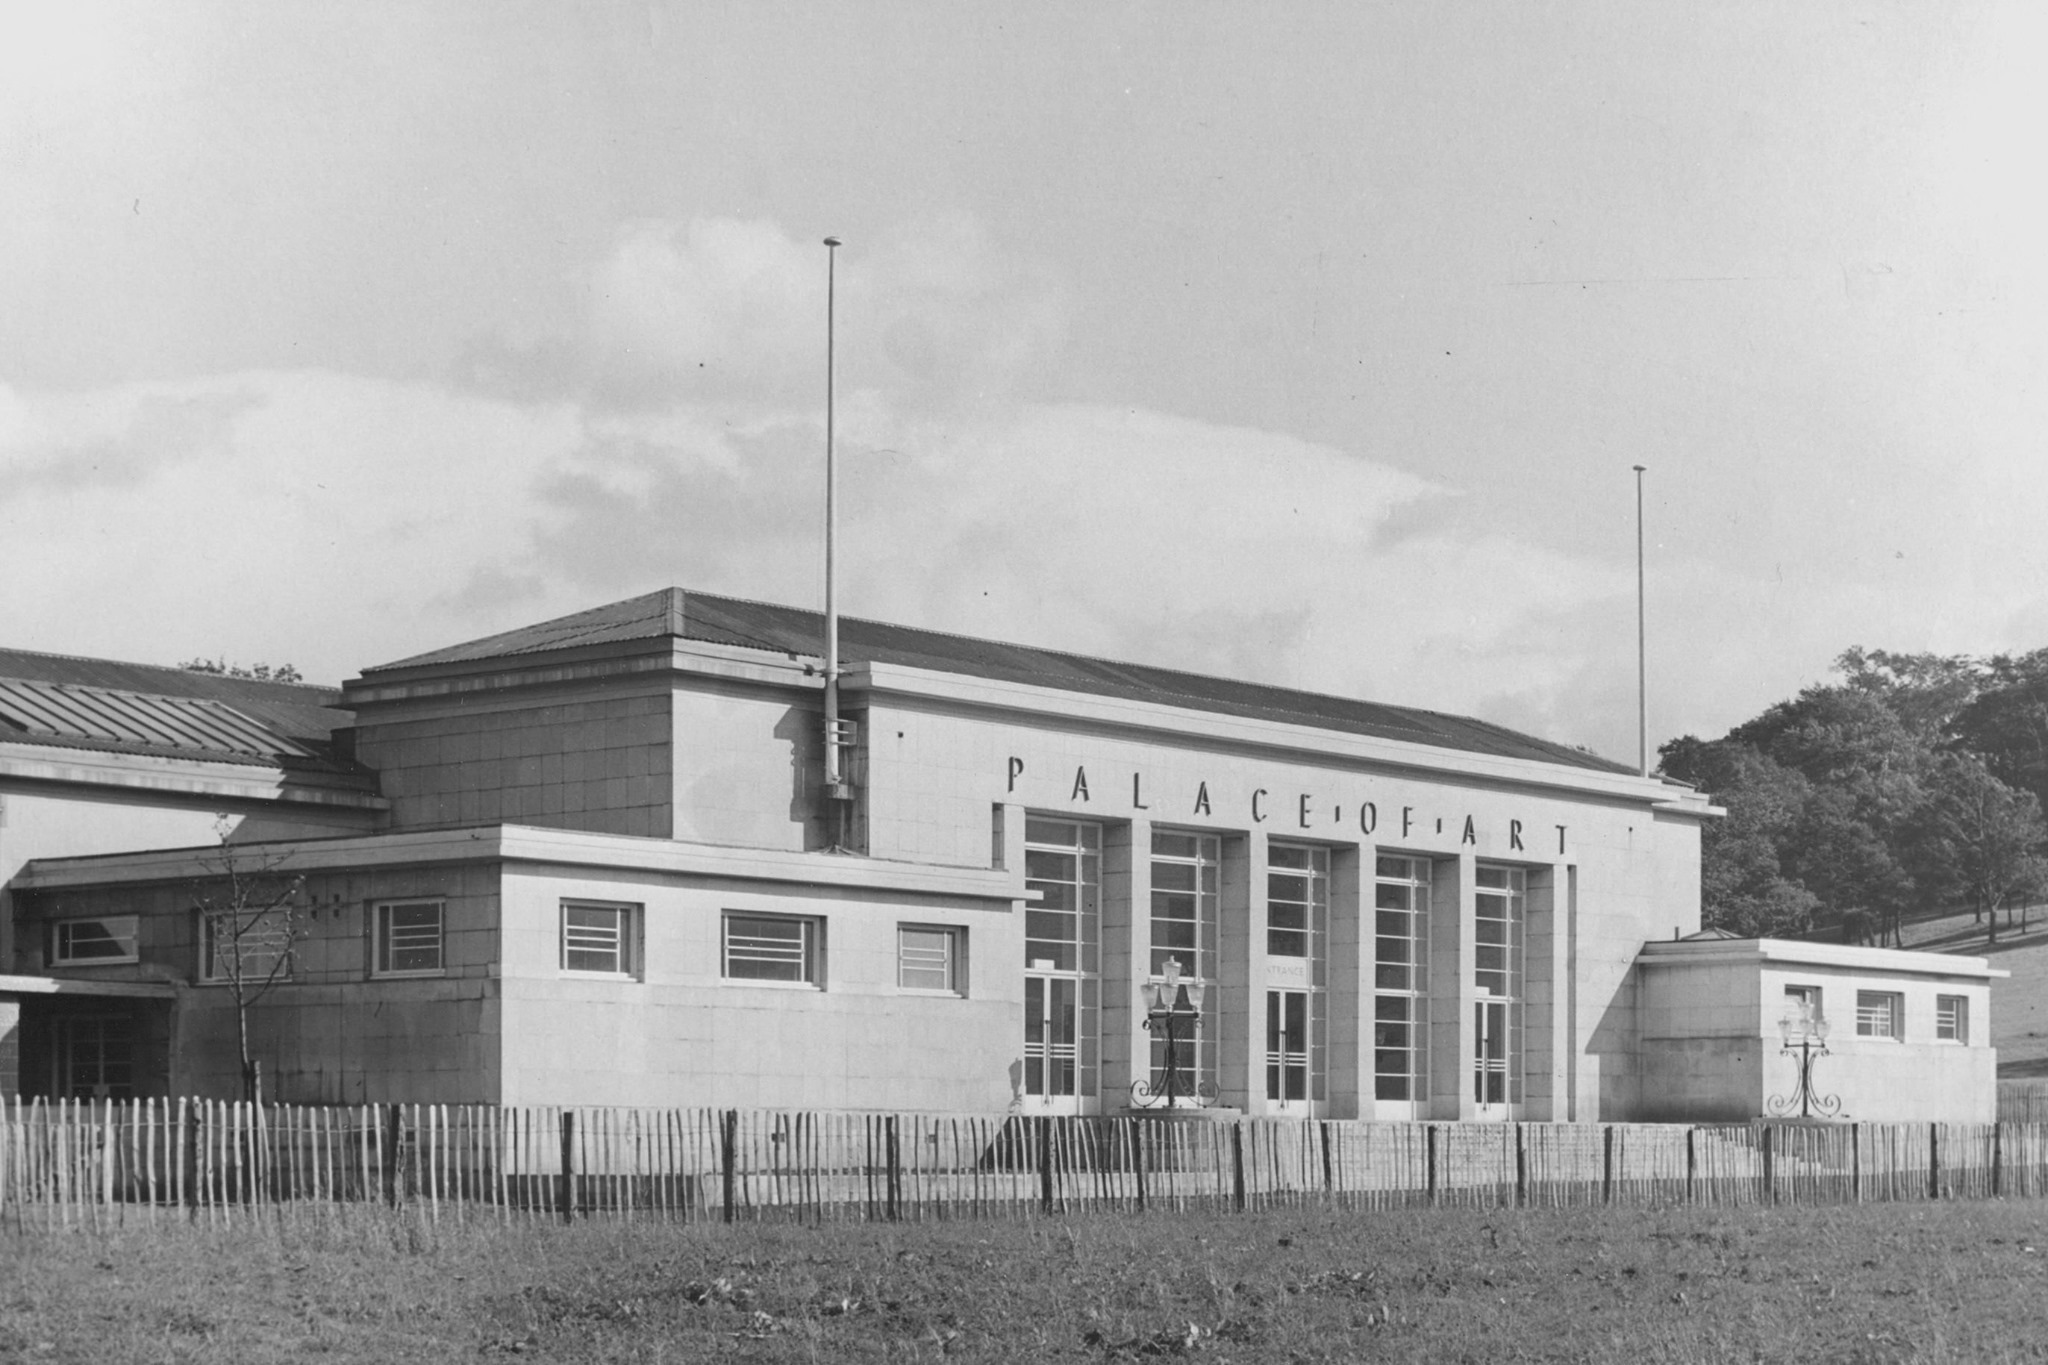 Palace of Art, Bellahouston, c.1950 Pic: Glasgow City Archives